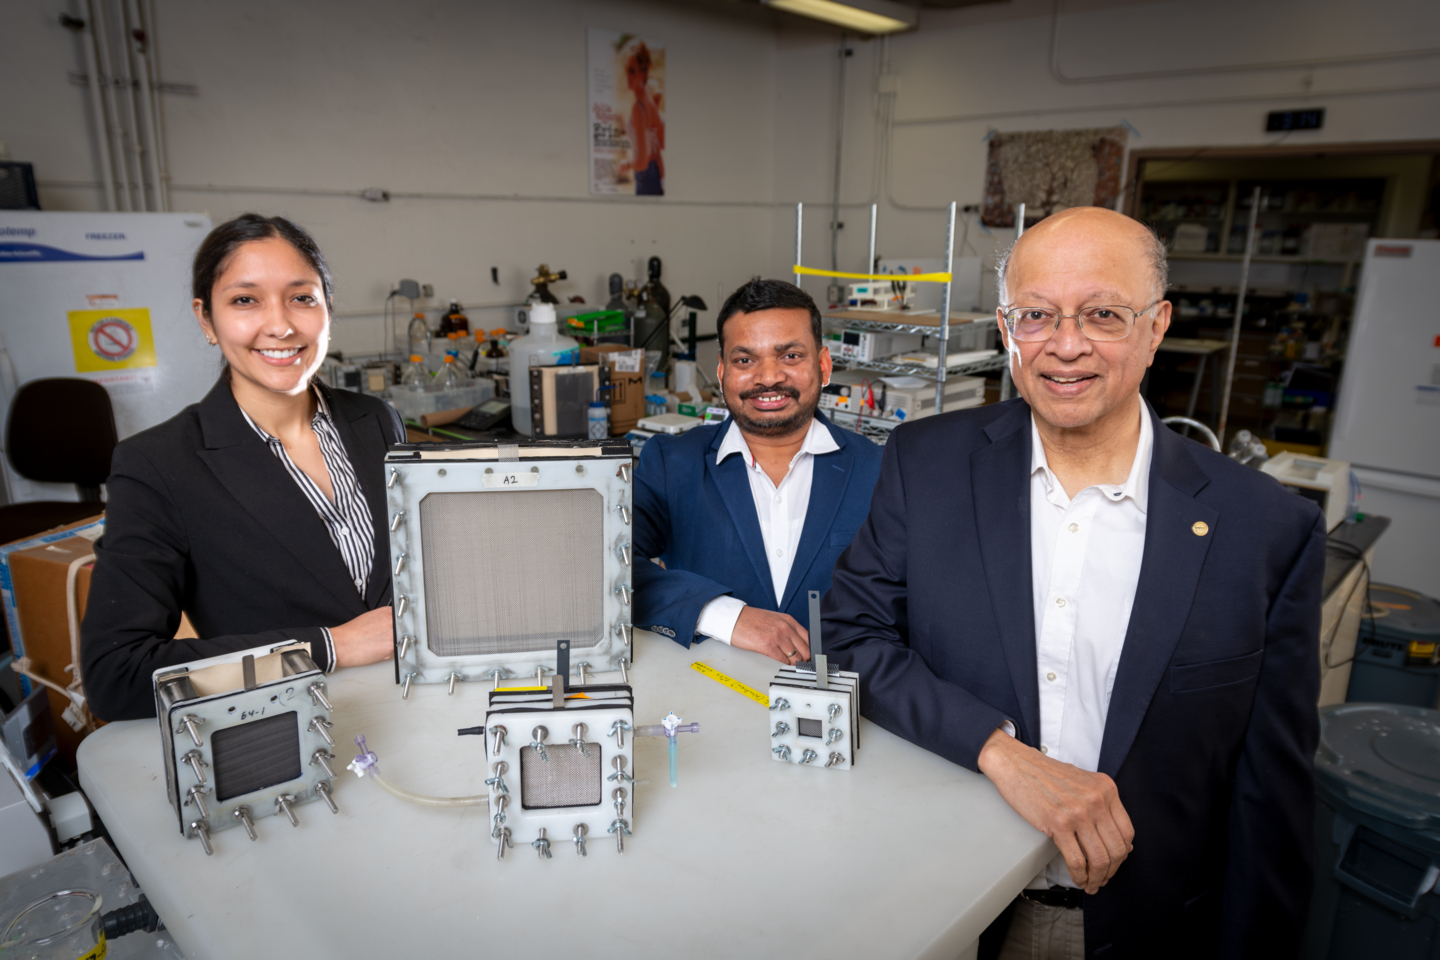 From left: Dana Hernandez, Siva Bandaru, and Ashok Gadgil sitting at a table with the arsenic filters they developed.